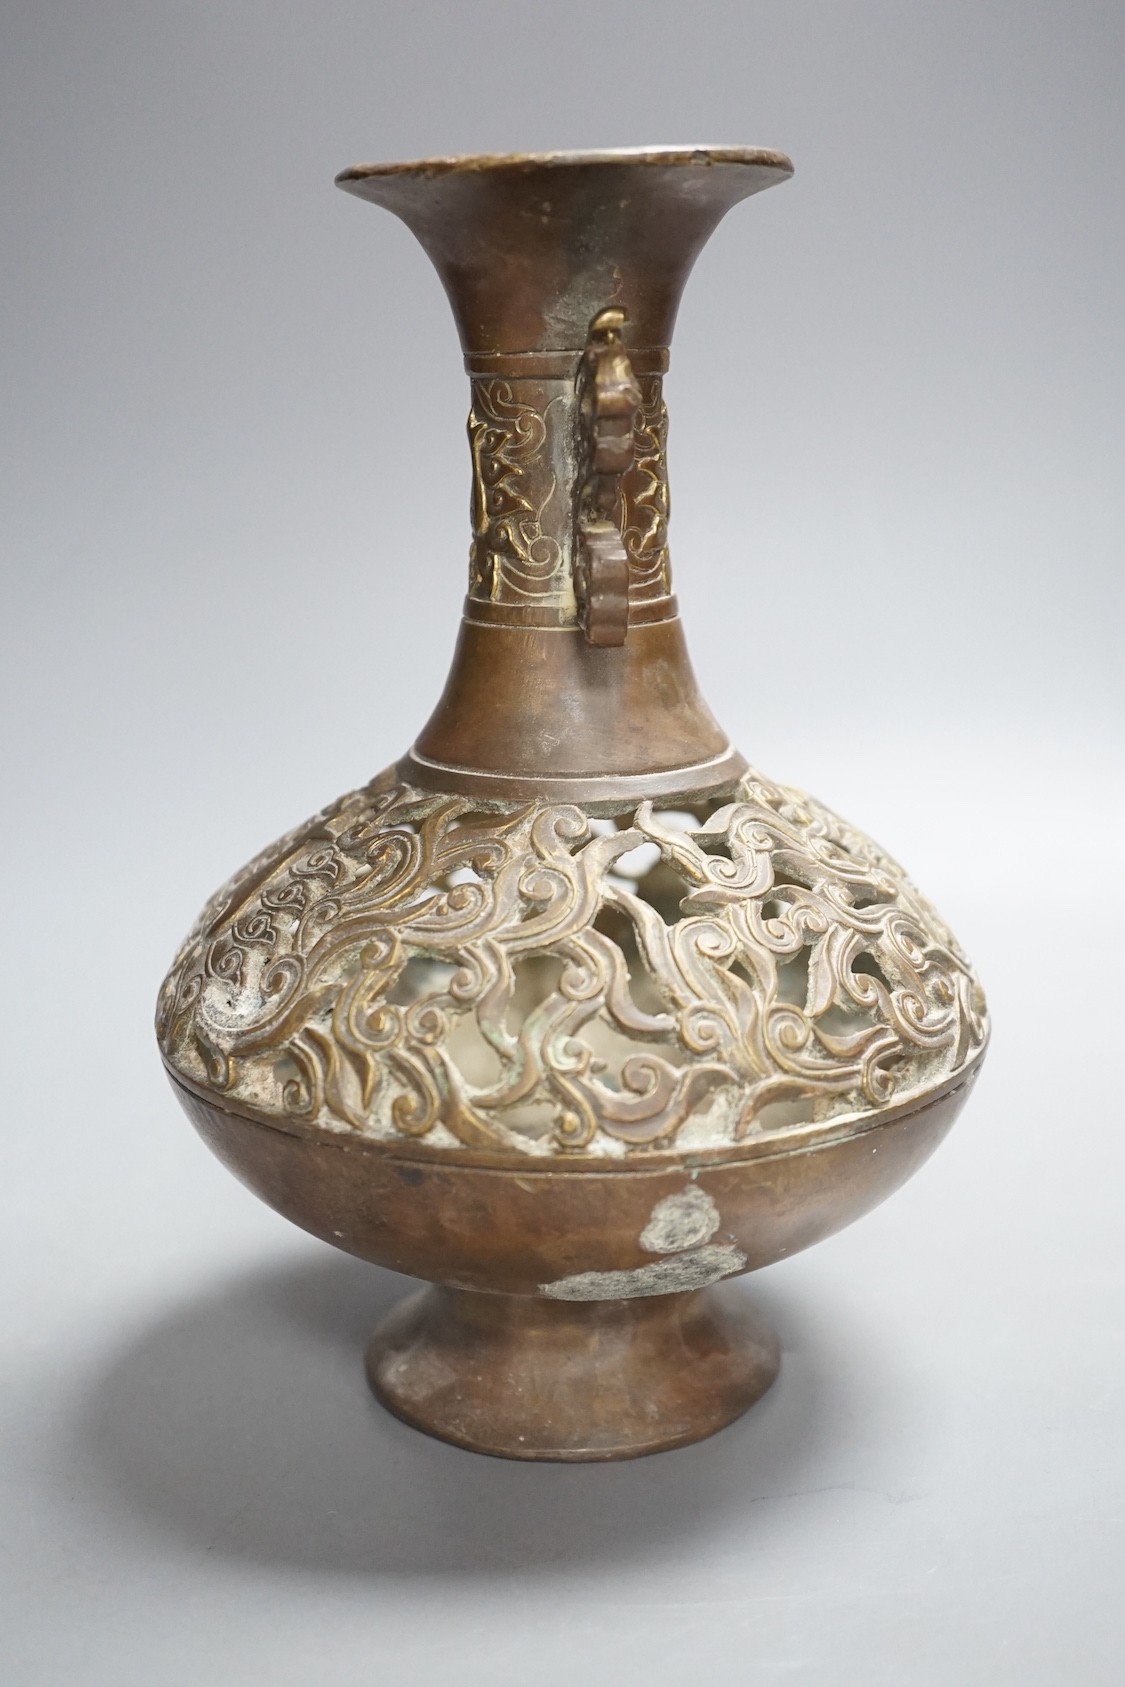 A Chinese pierced brass vase - 20cm tall